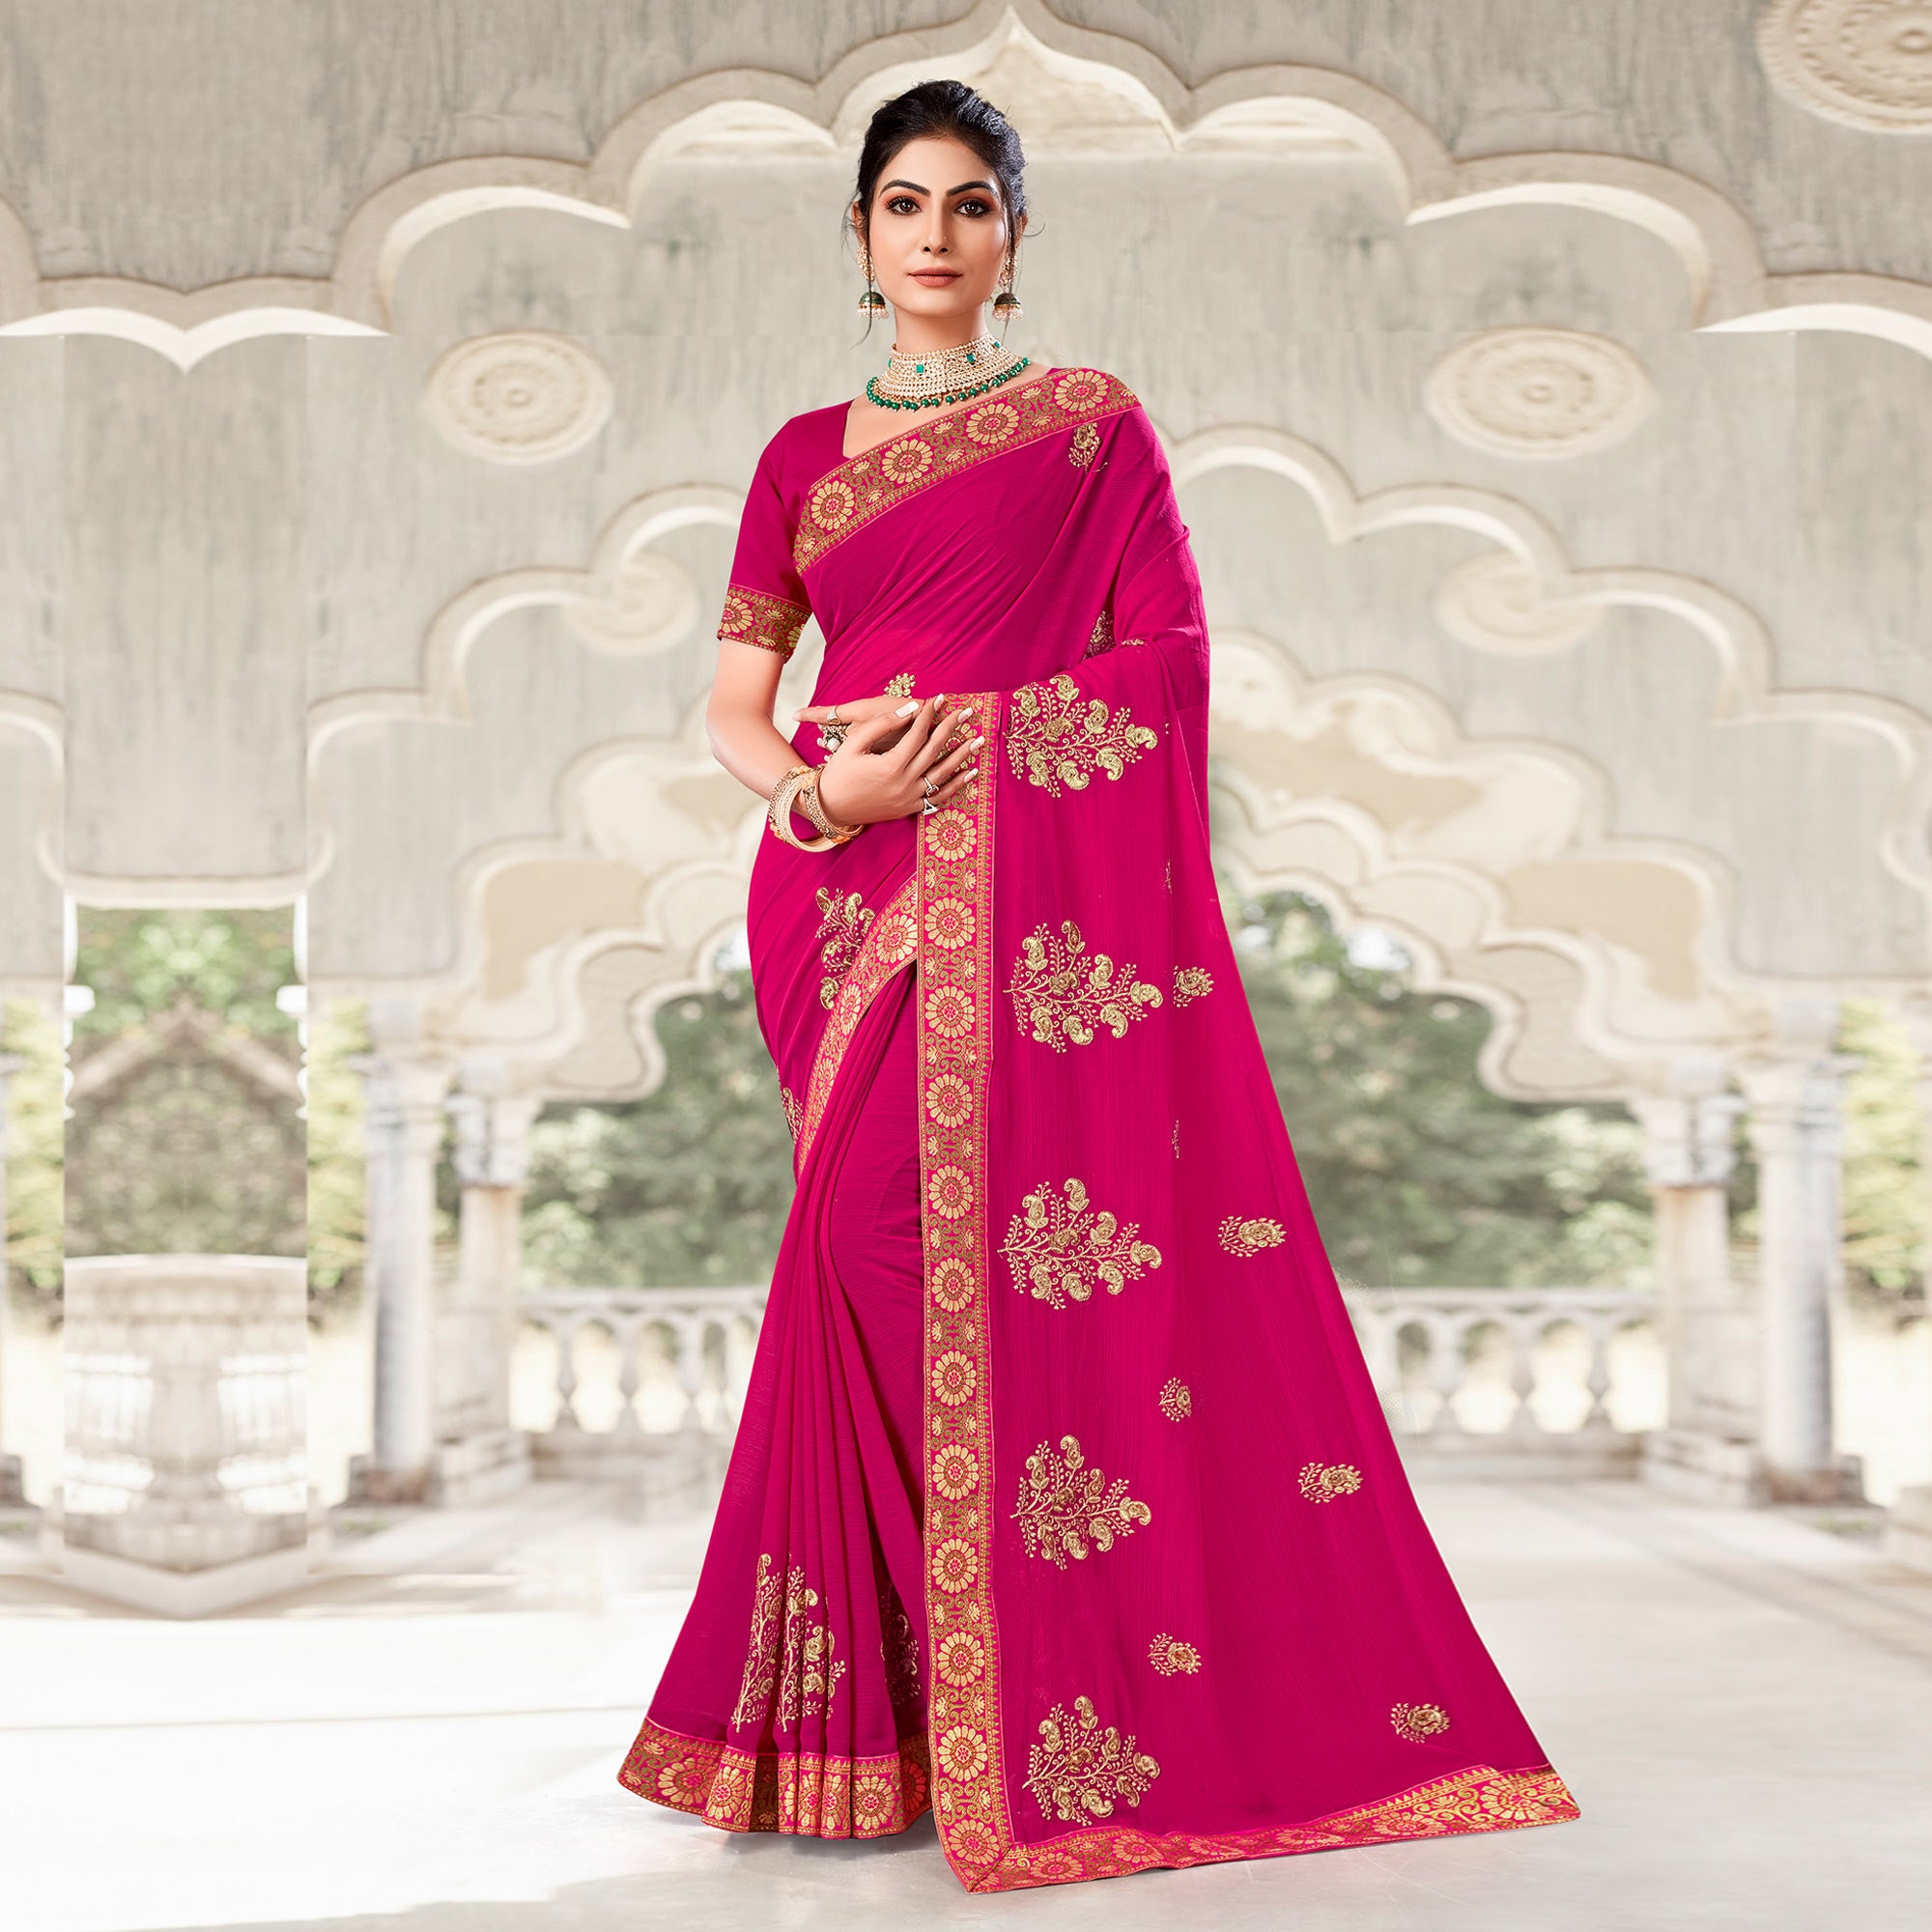 Rani Pink Floral Embroidered Georgette Saree